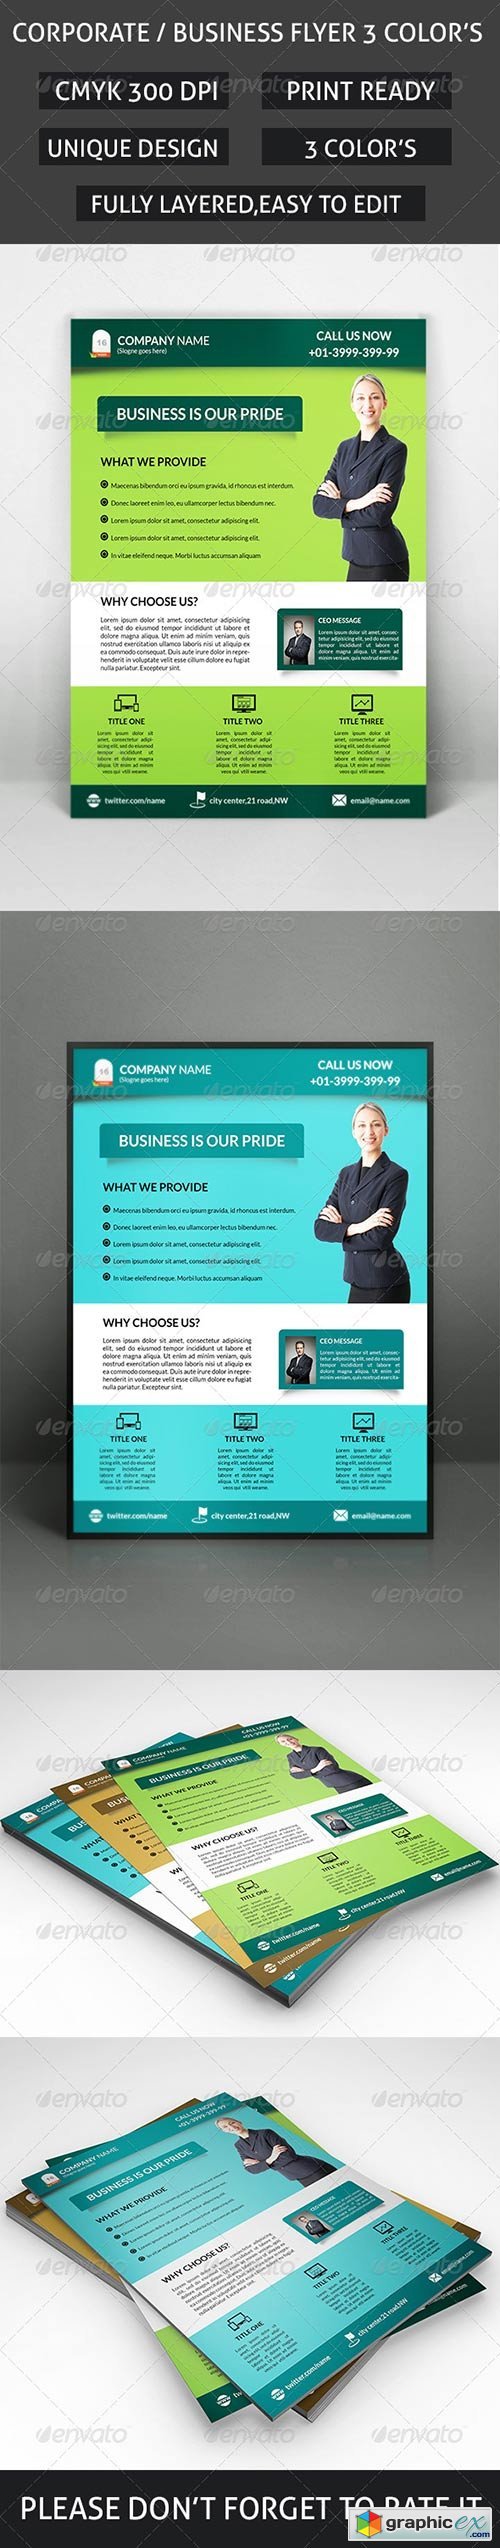 Corporate or Business Flyer